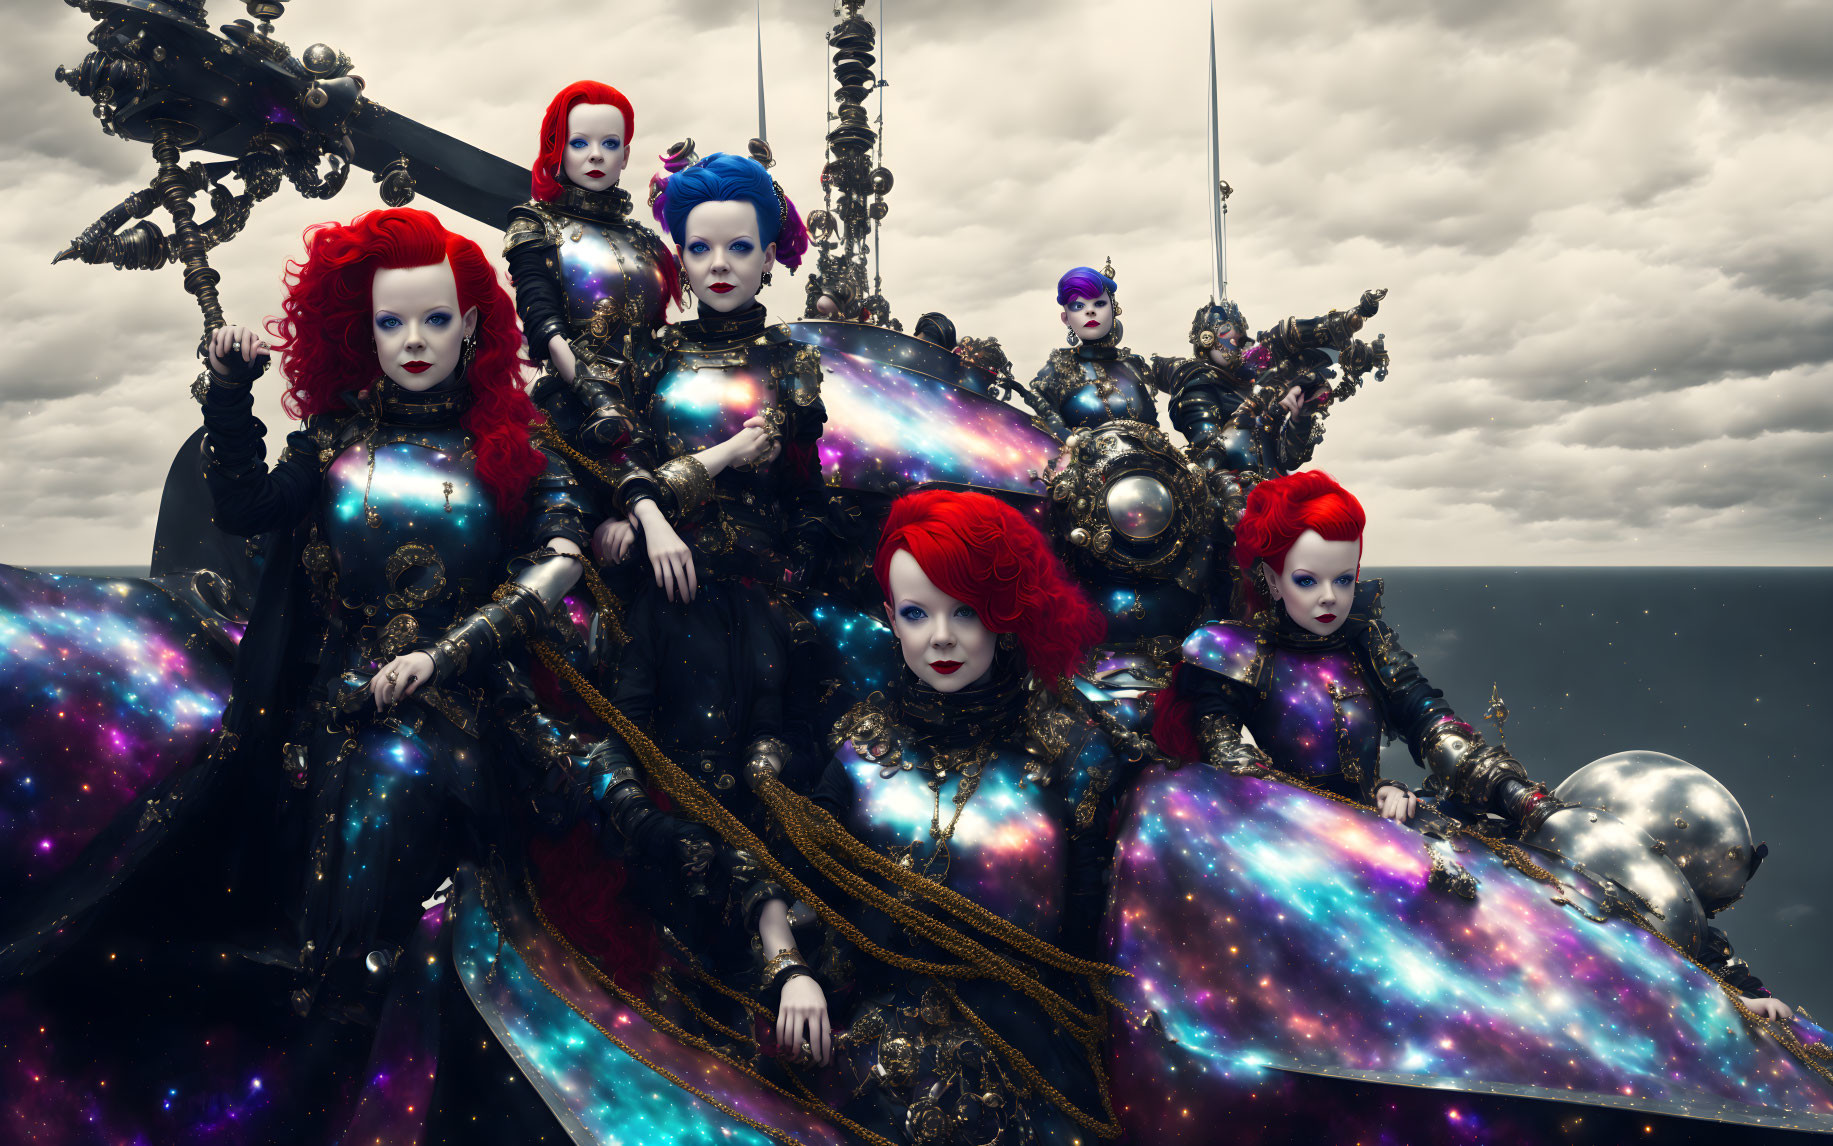 Seven people in space-themed costumes with red and blue wigs against cloudy sky.